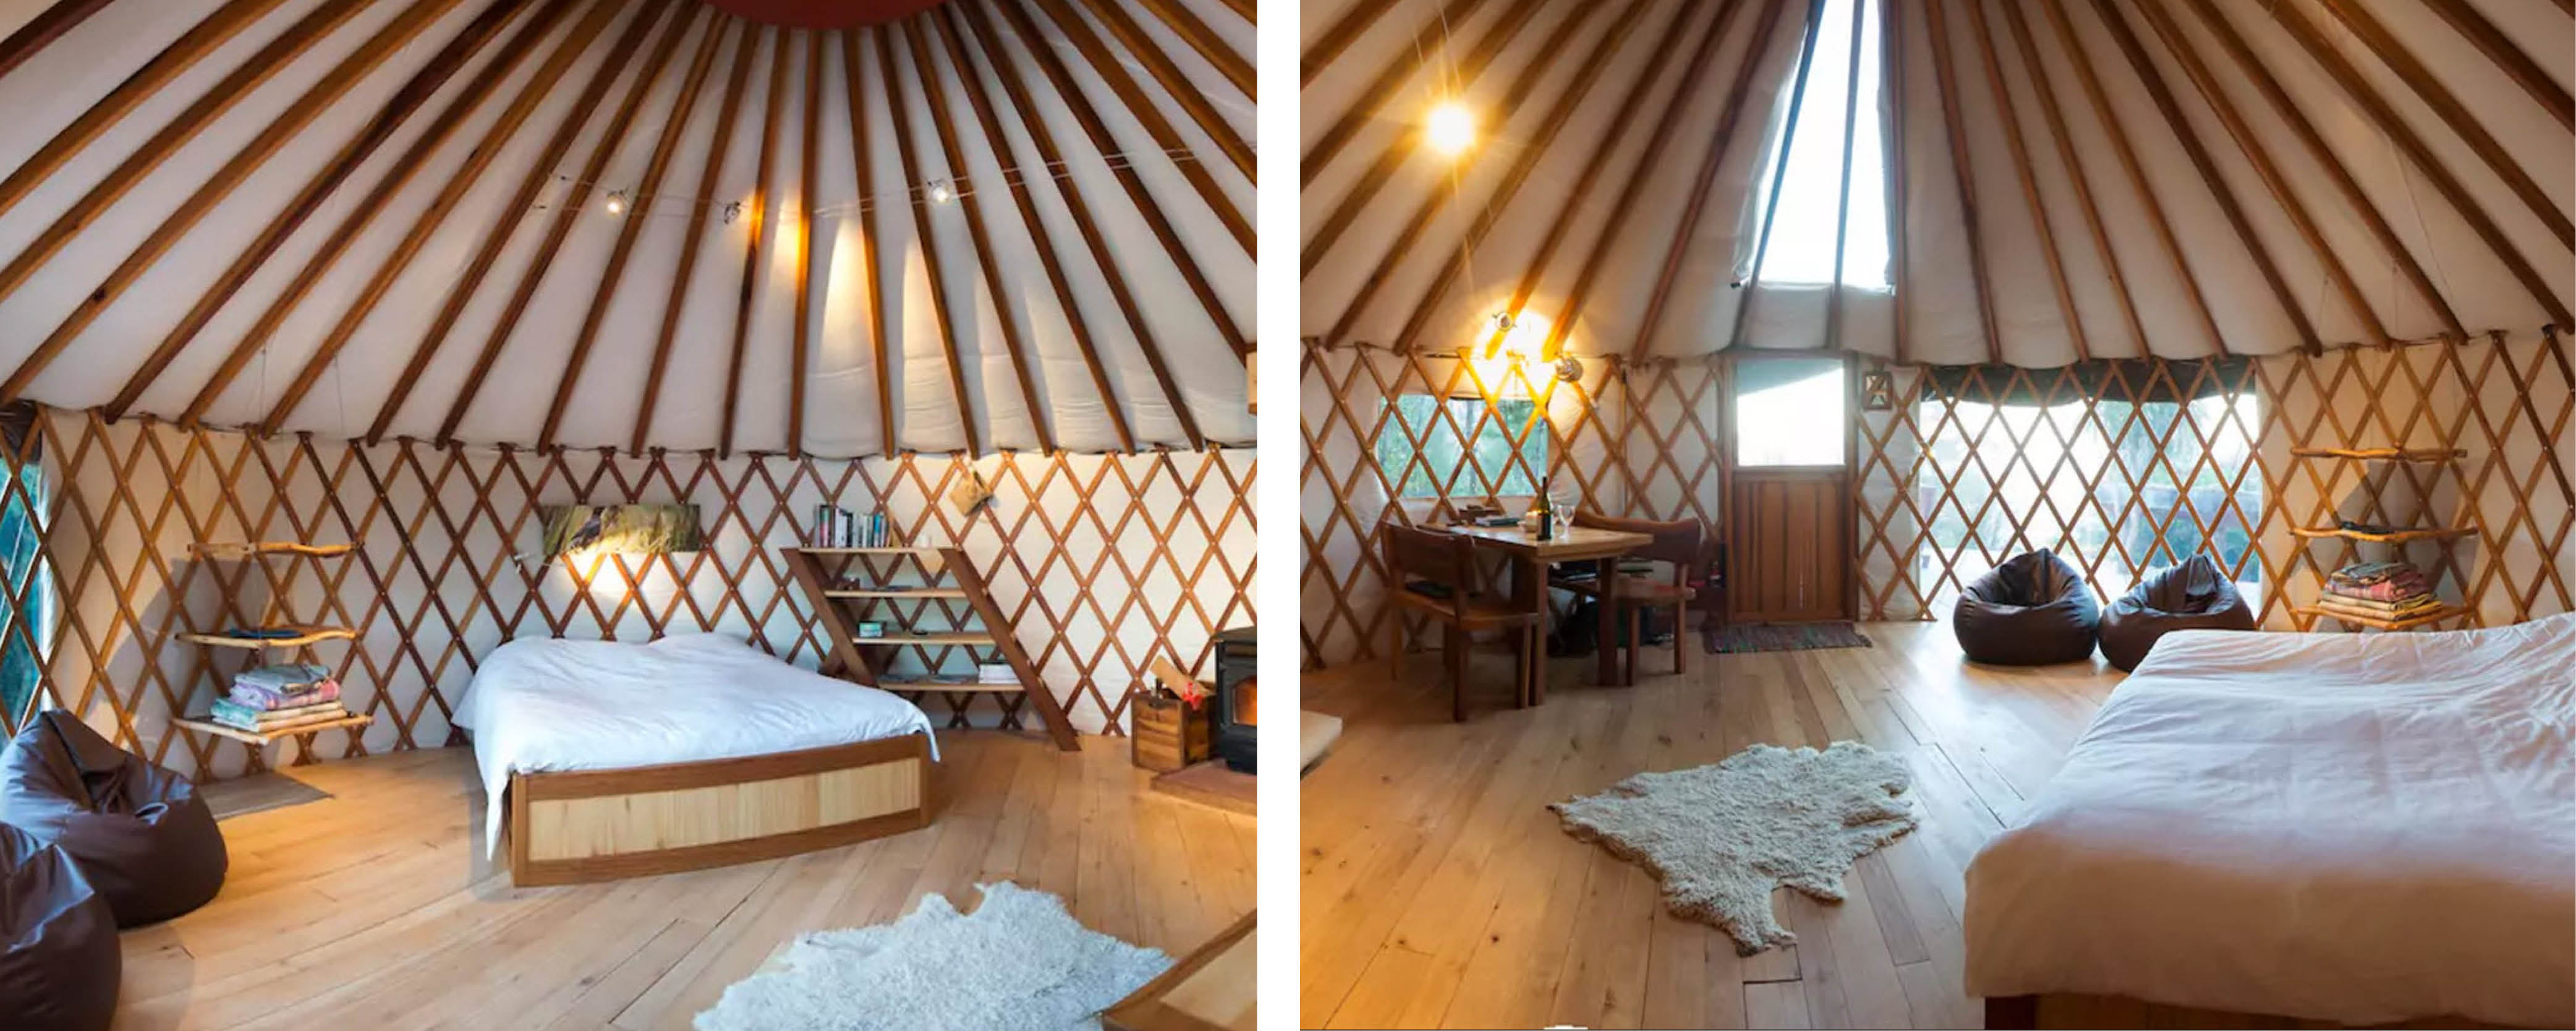 New-Zealand's-Most-Stylish-Airbnb's-Gallery-1000x40013